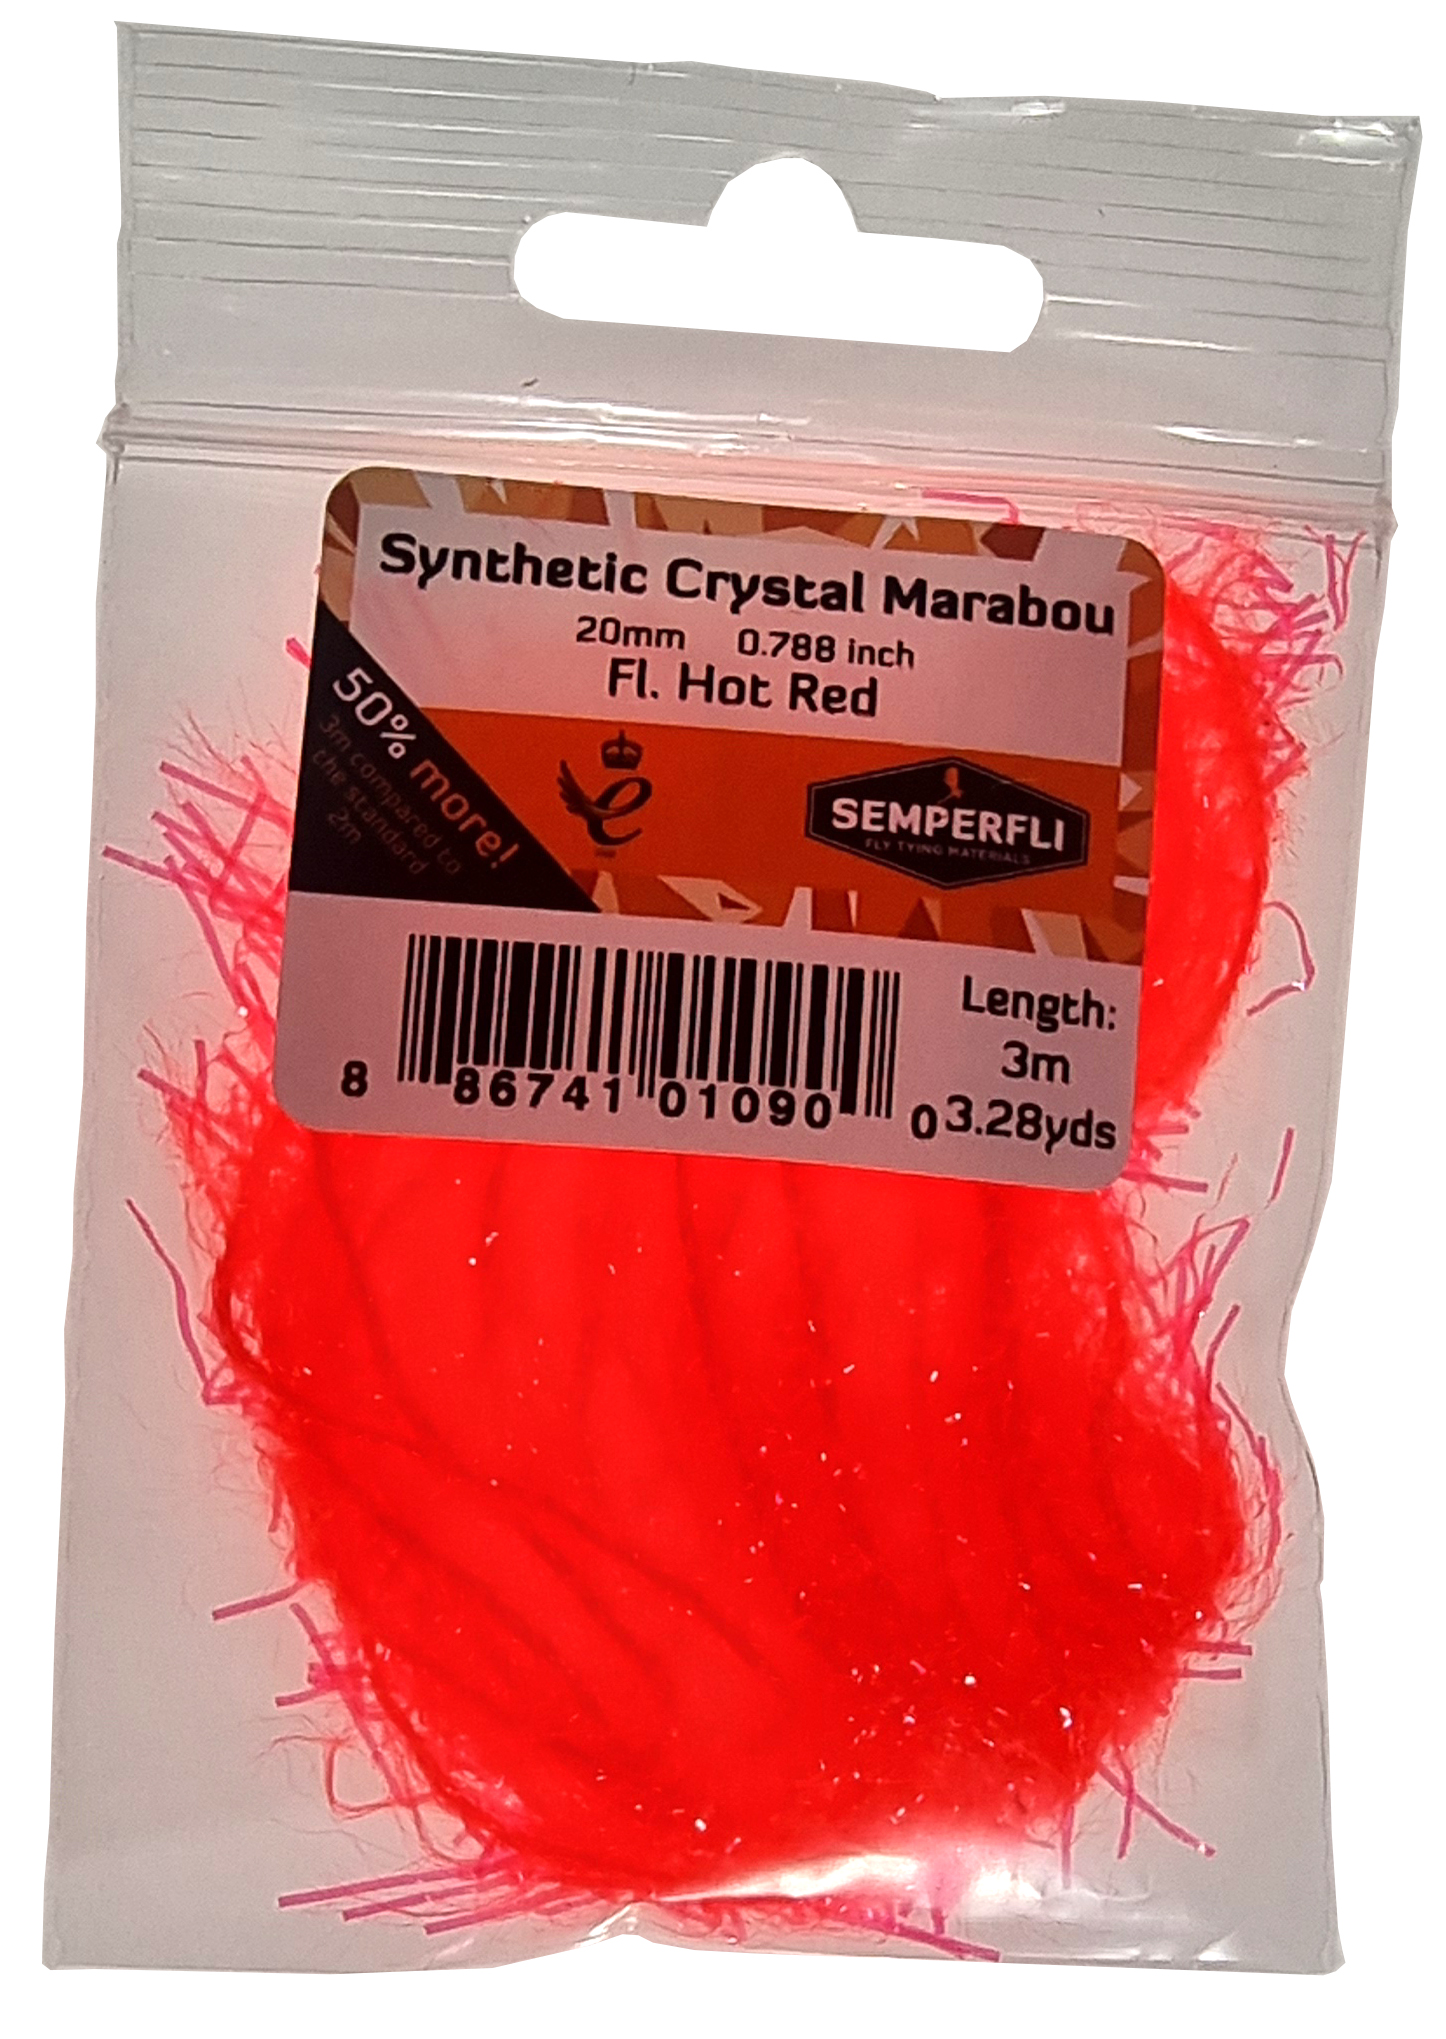 Synthetic Crystal Marabou 20mm Fl Hot Red 